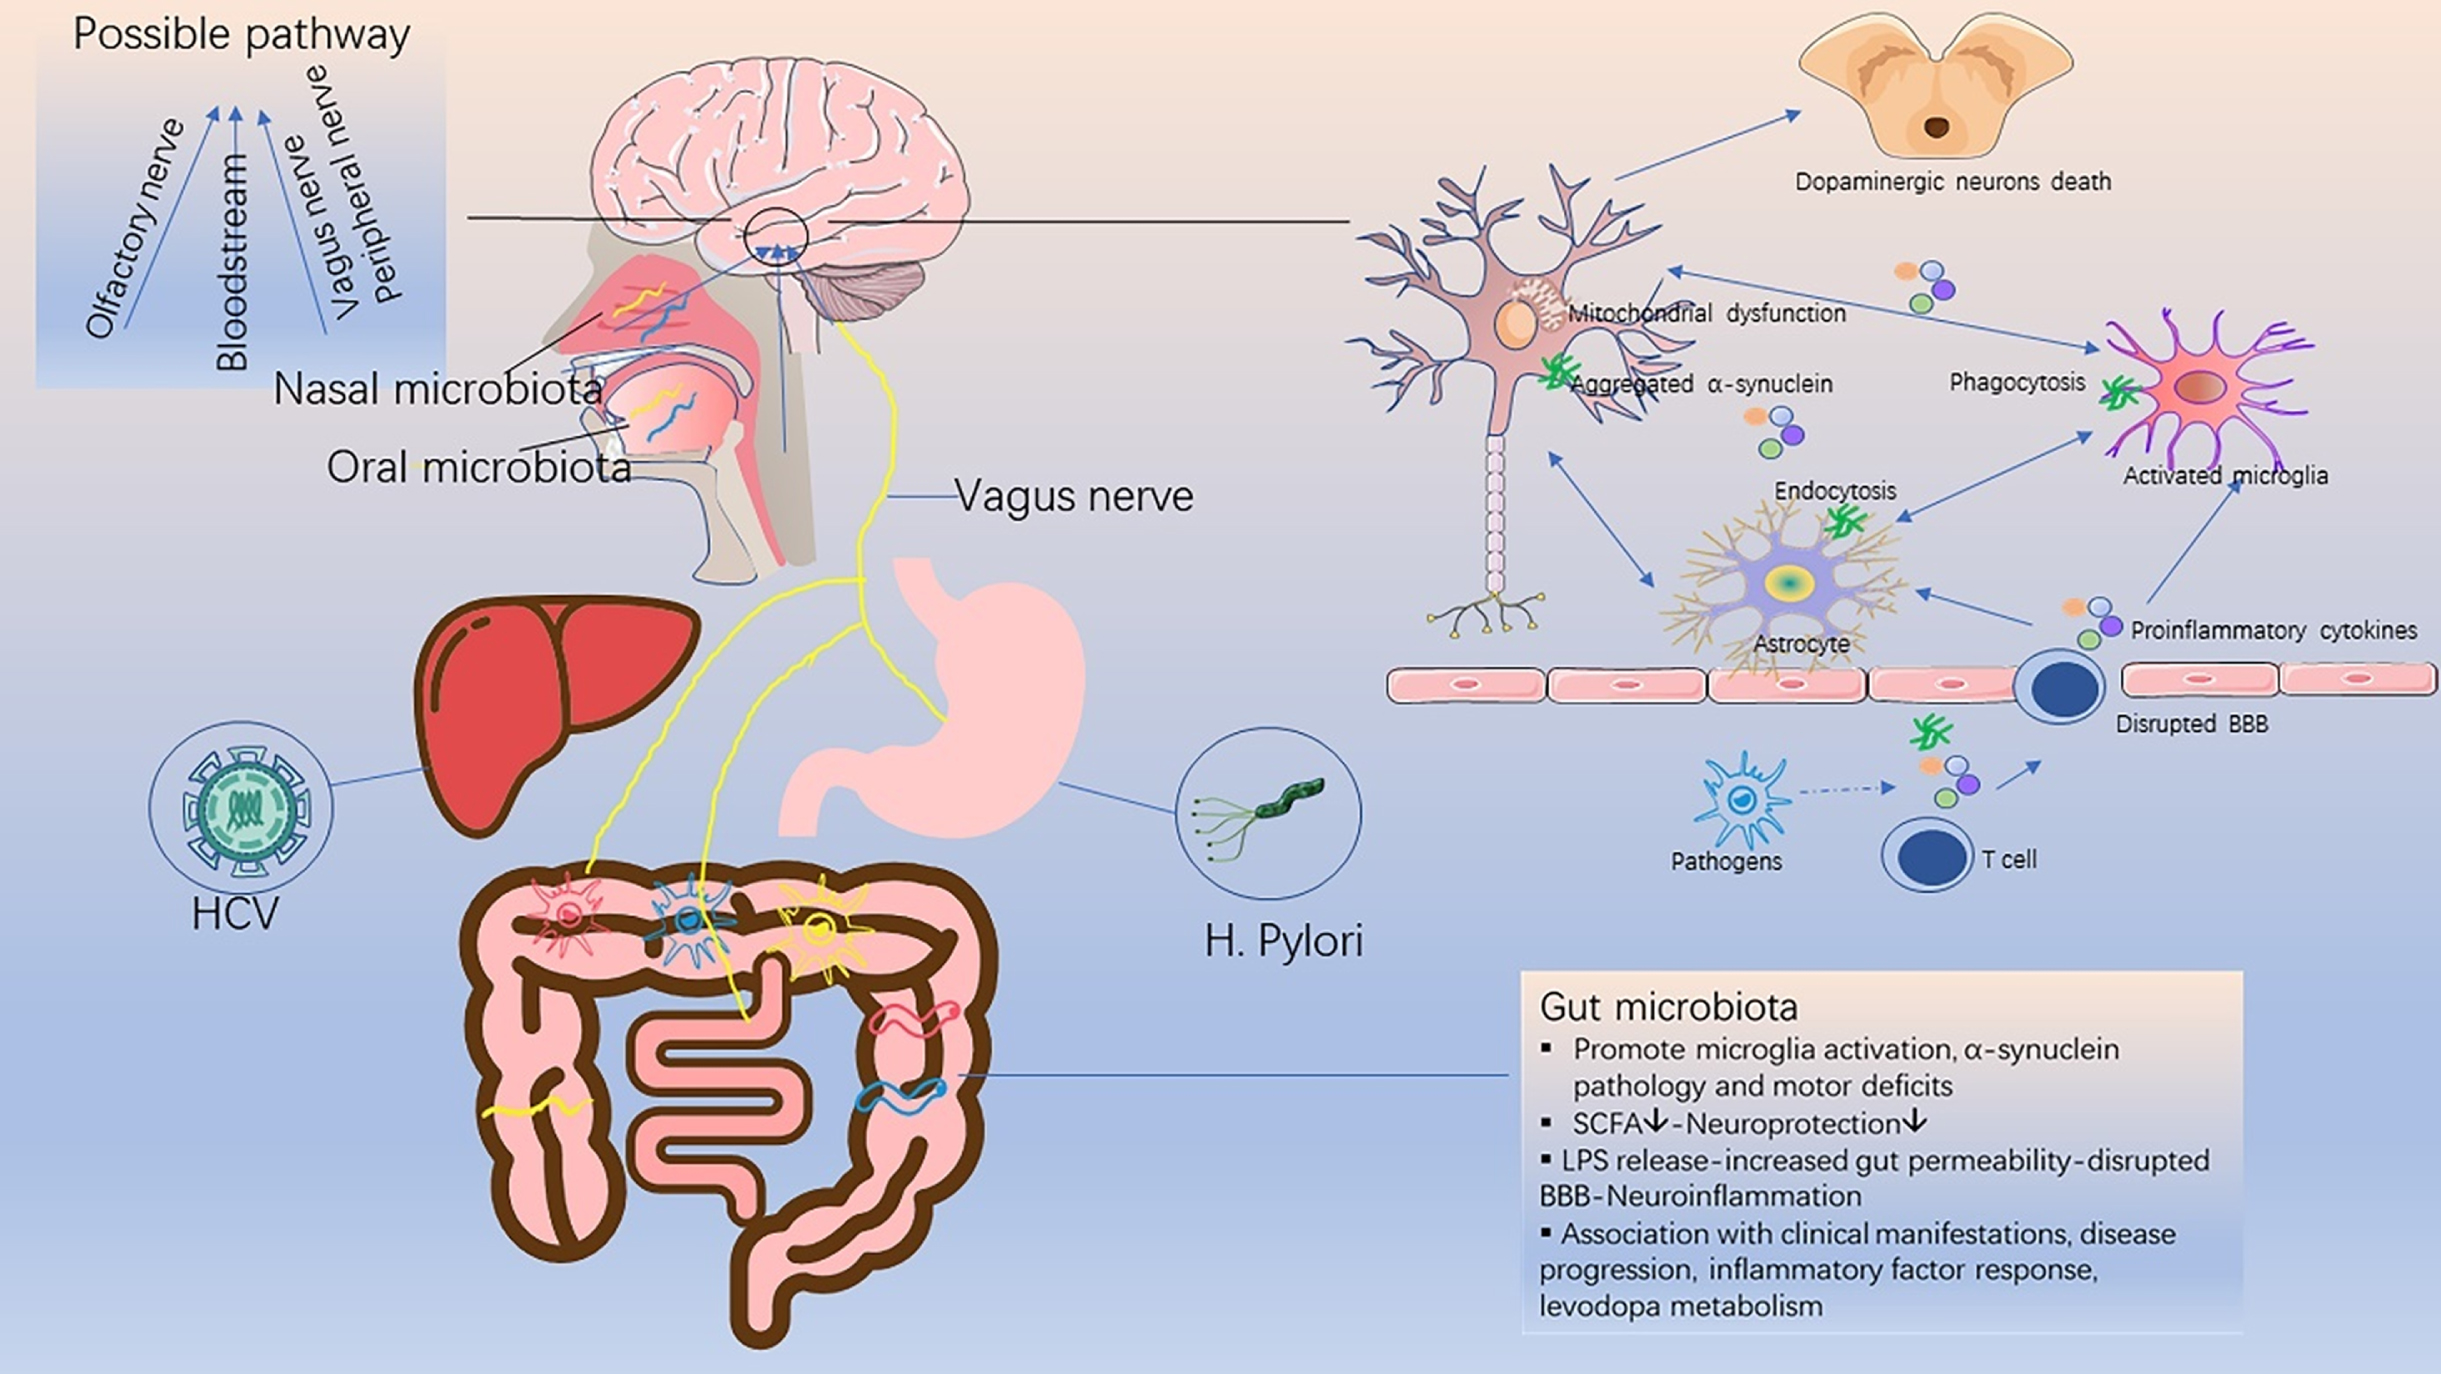 Schematic diagram of the relationship between infective pathogens and Parkinson’s disease. Infective pathogens enter the central nervous system through the bloodstream or nerves, causing inflammatory response and blood-brain barrier disruption through the release of pro-inflammatory cytokines. This subsequently leads to a series of glial activation, neuroinflammation, α-synuclein accumulation and neuronal death, which trigger or accelerate the onset of PD. SCFA, short chain fatty acids; LPS, lipopolysaccharide; BBB, blood-brain barrier.